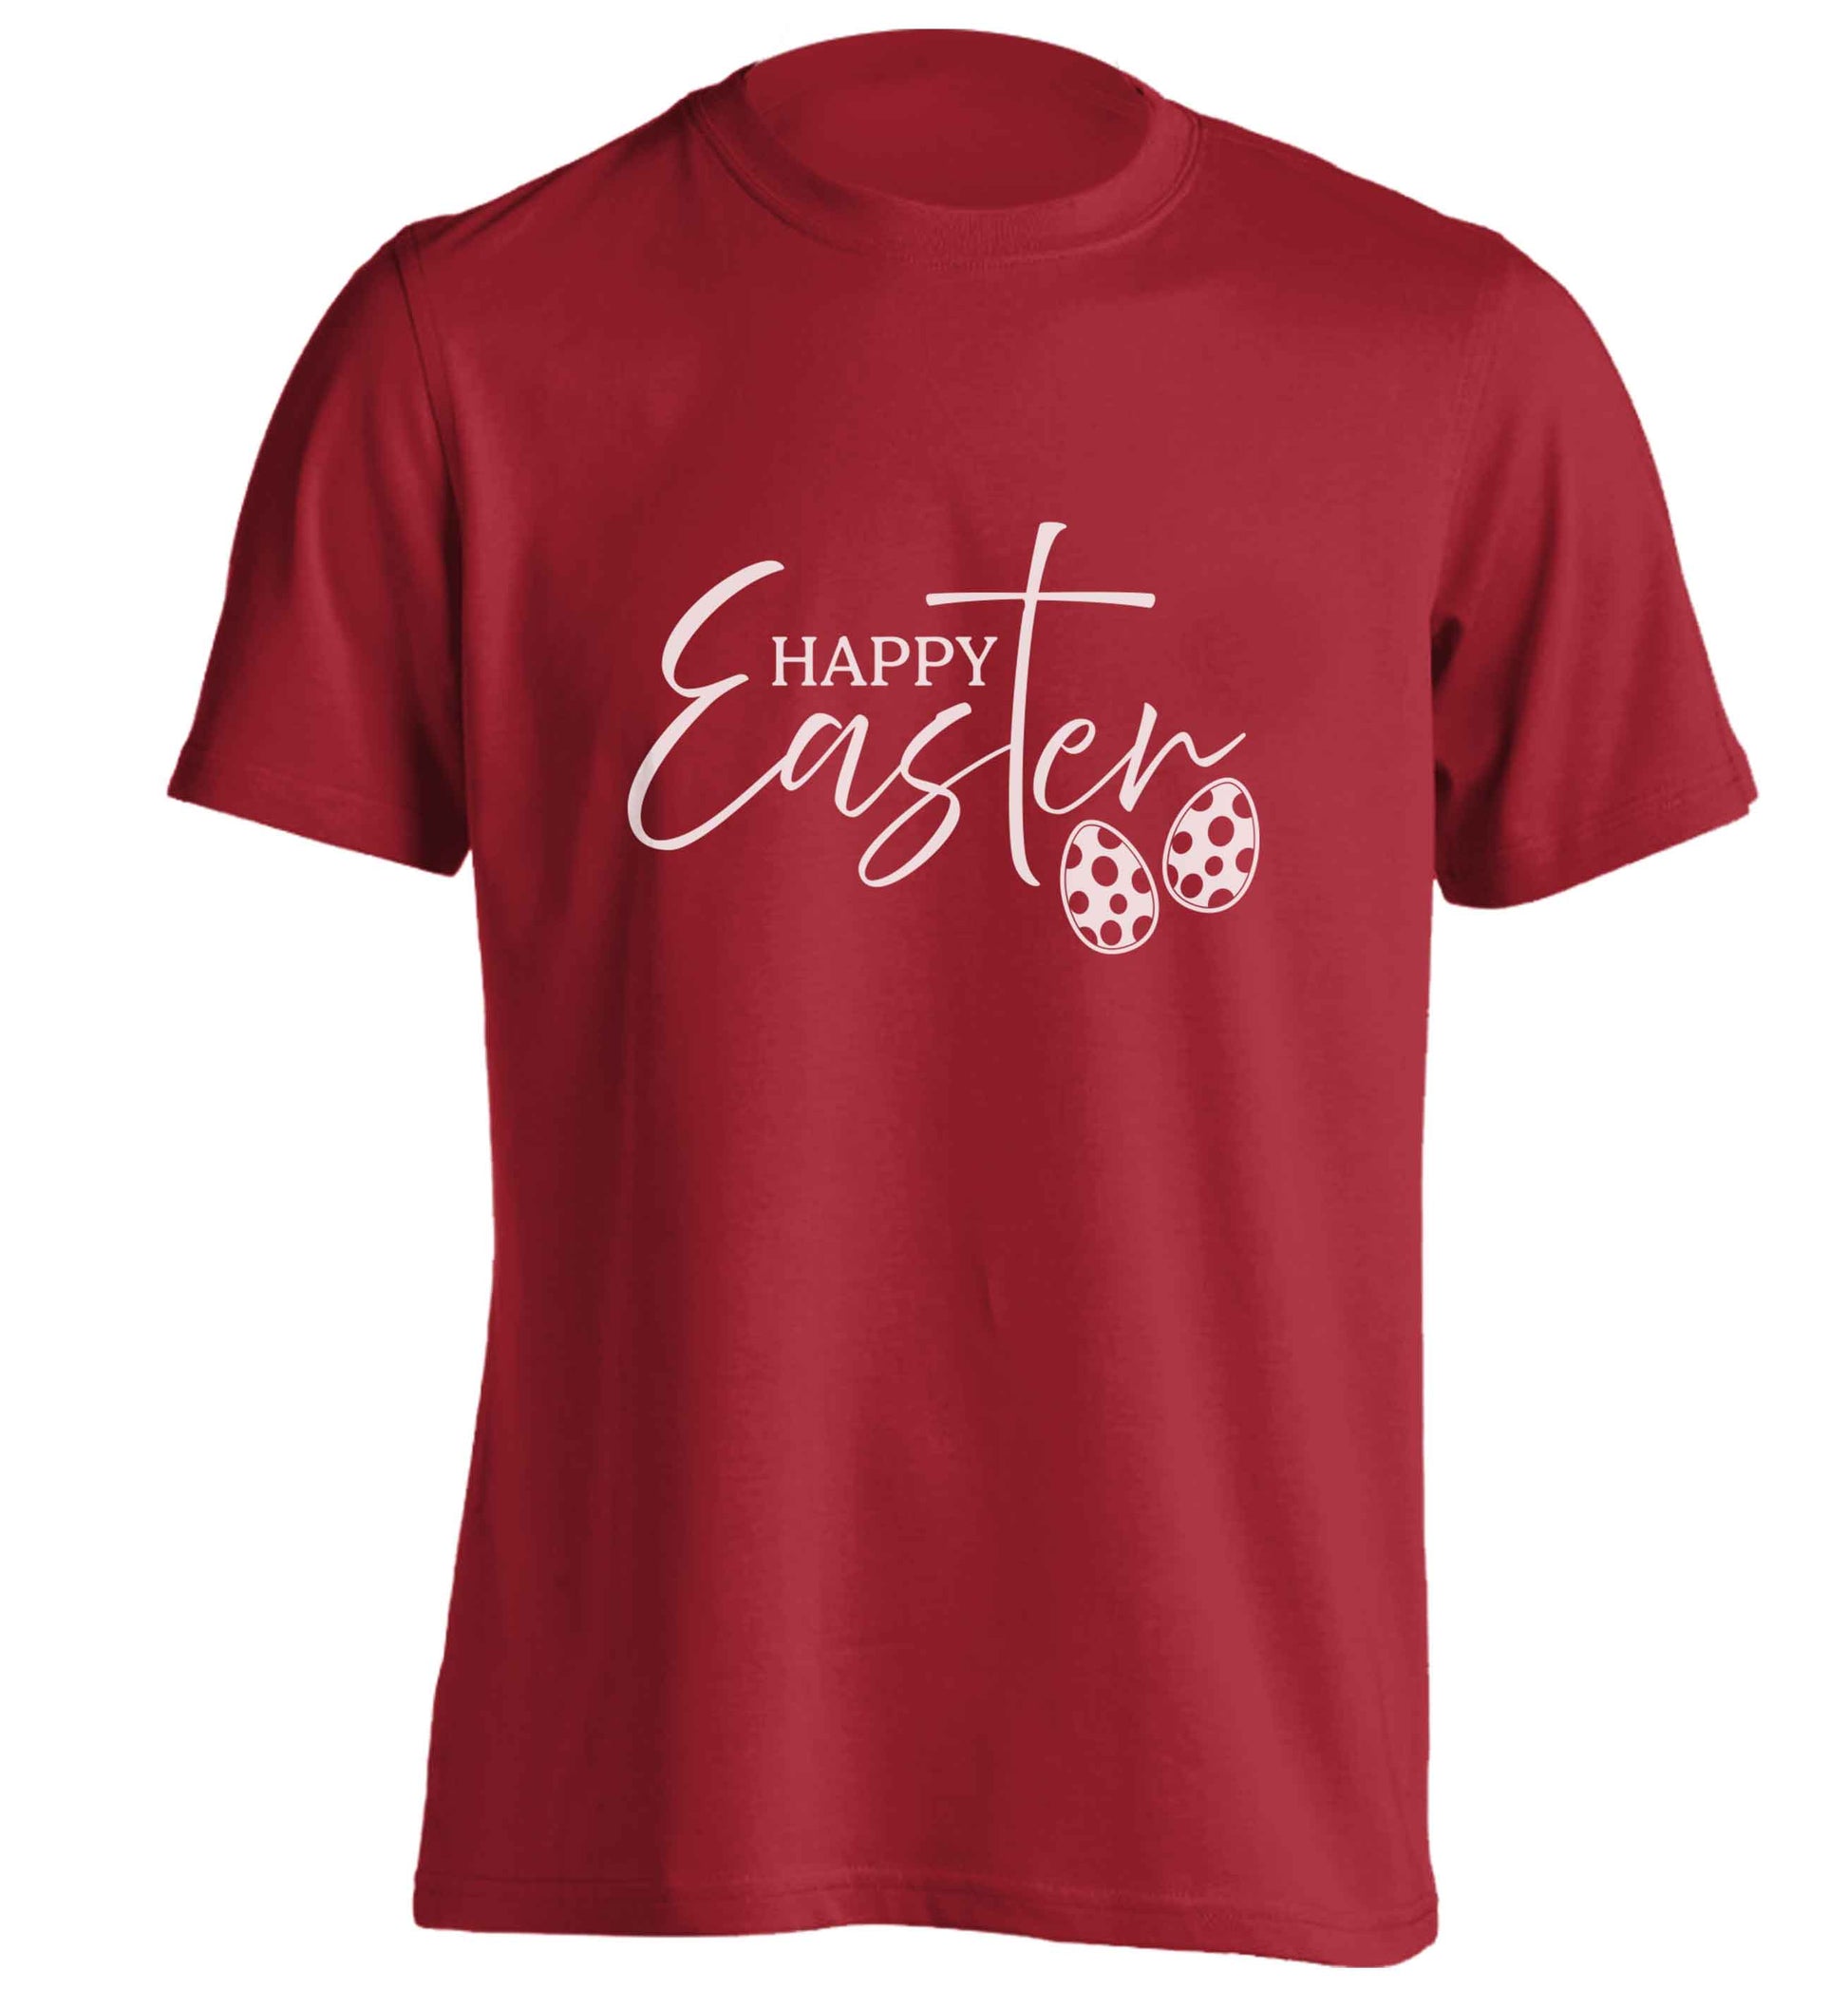 Happy Easter adults unisex red Tshirt 2XL